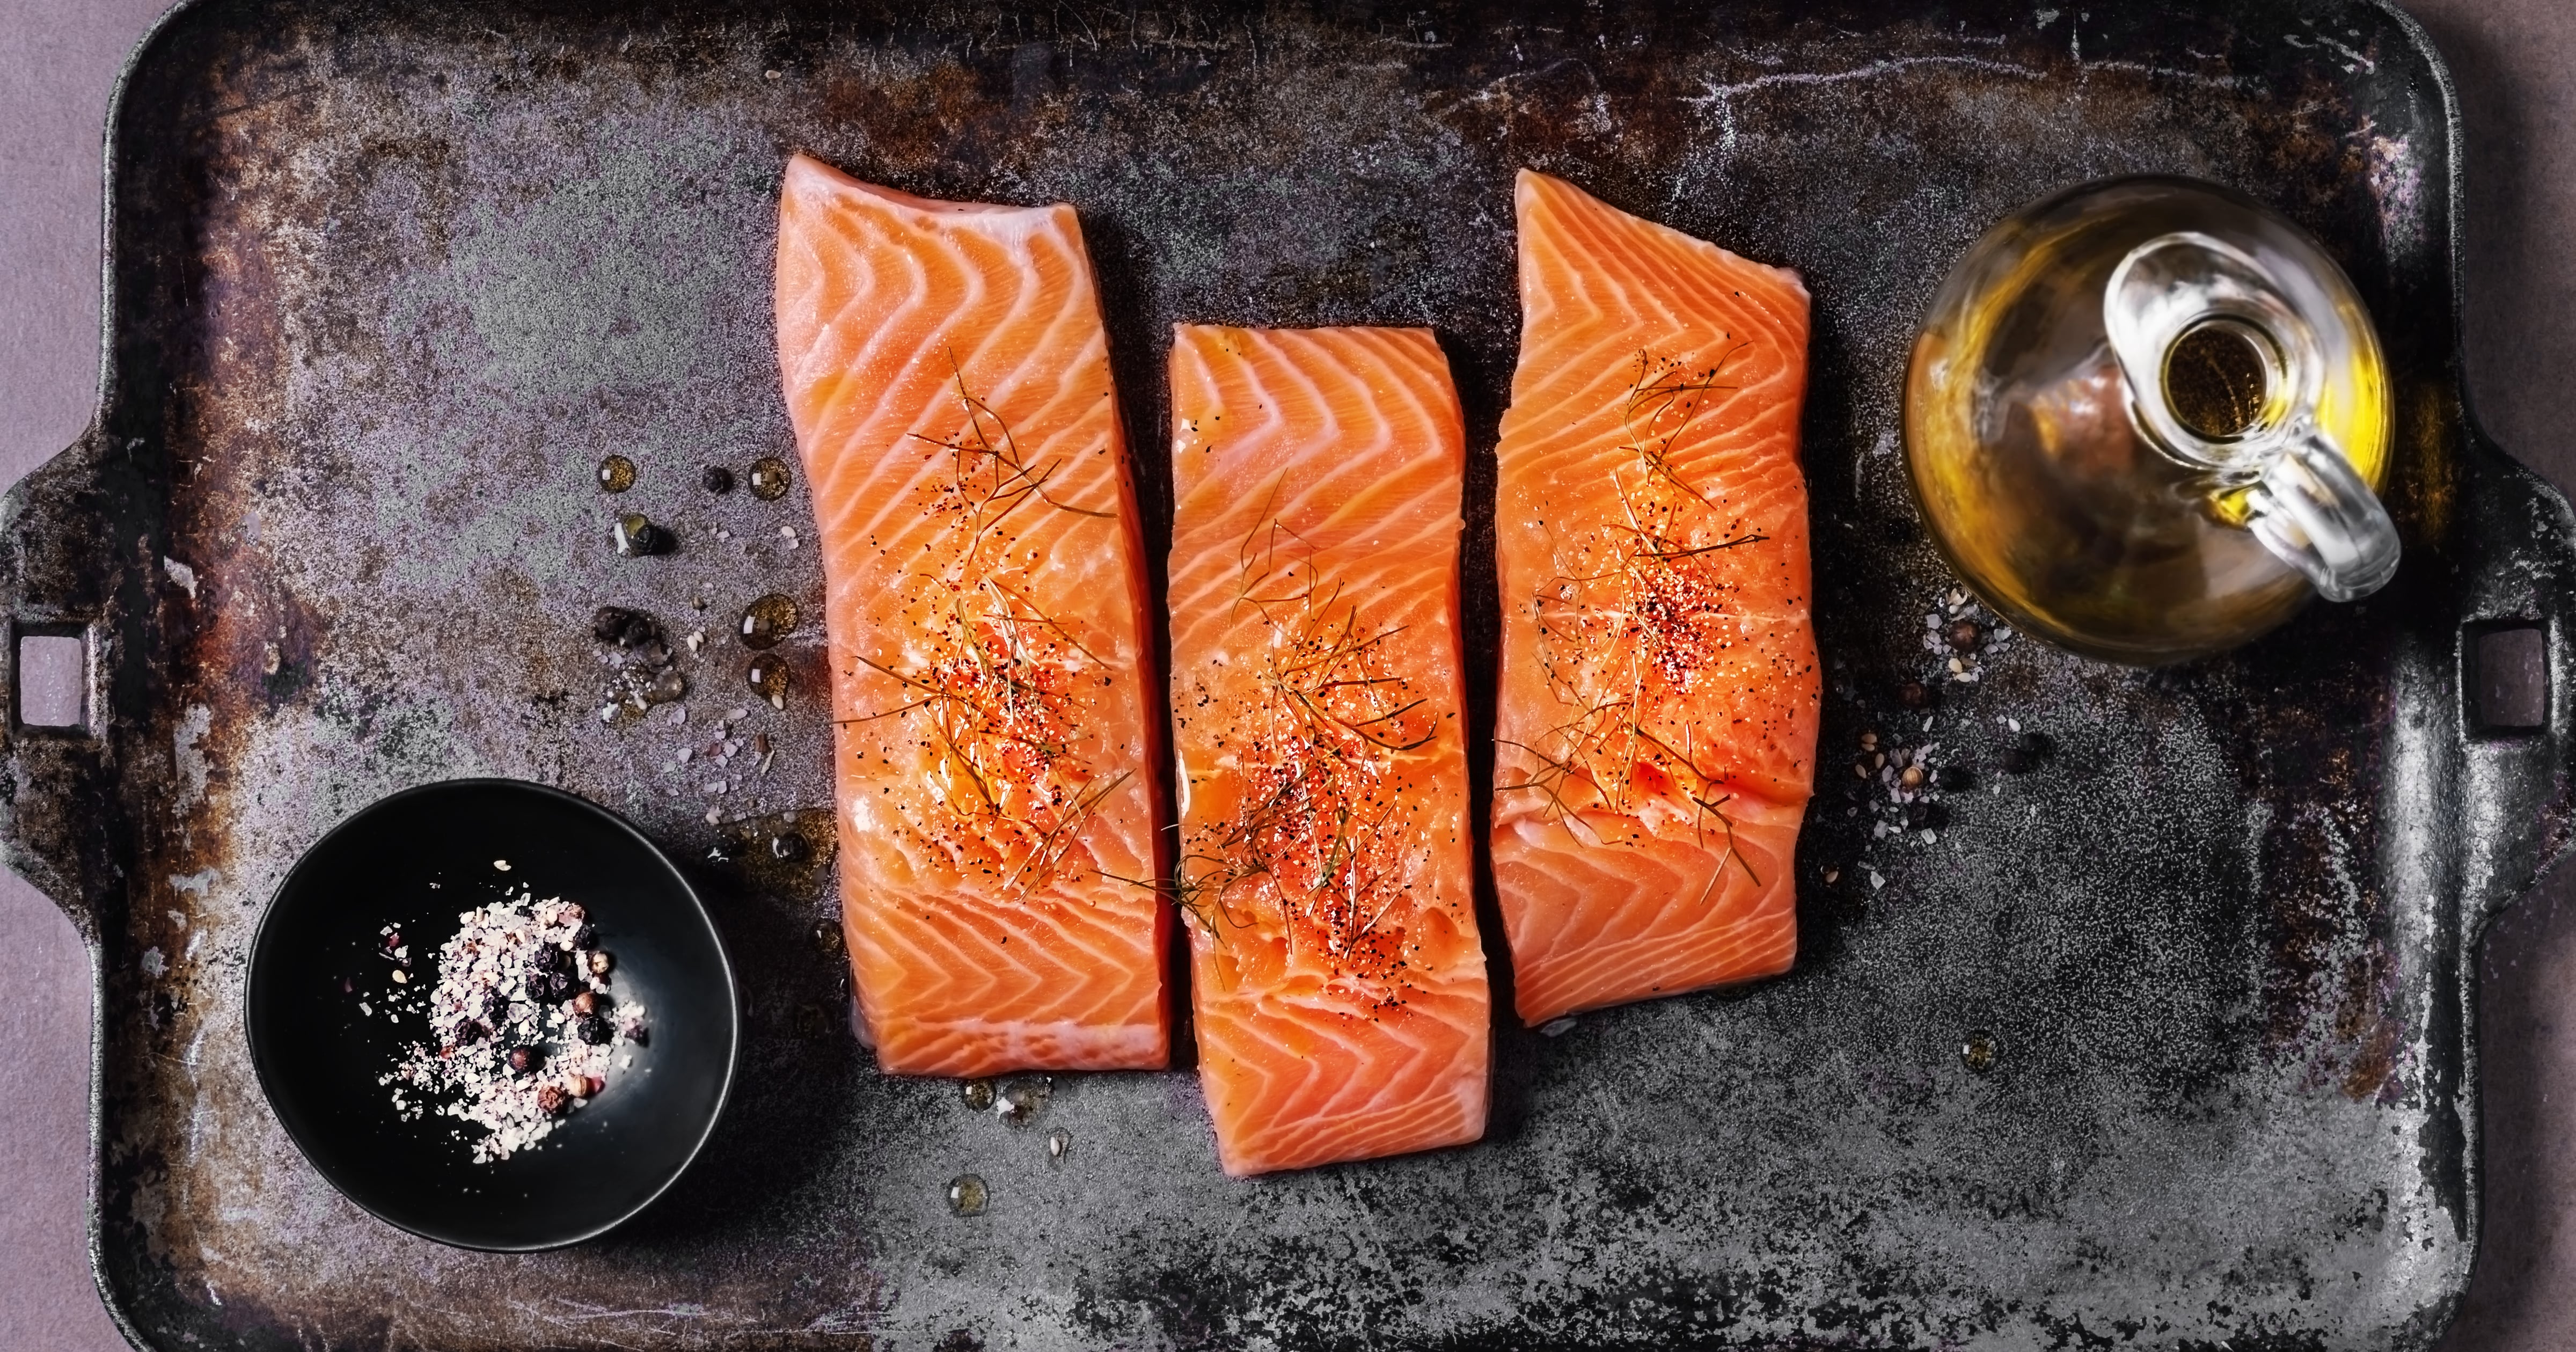 Salmon Is Even Better For You Than You May Think, Experts Say